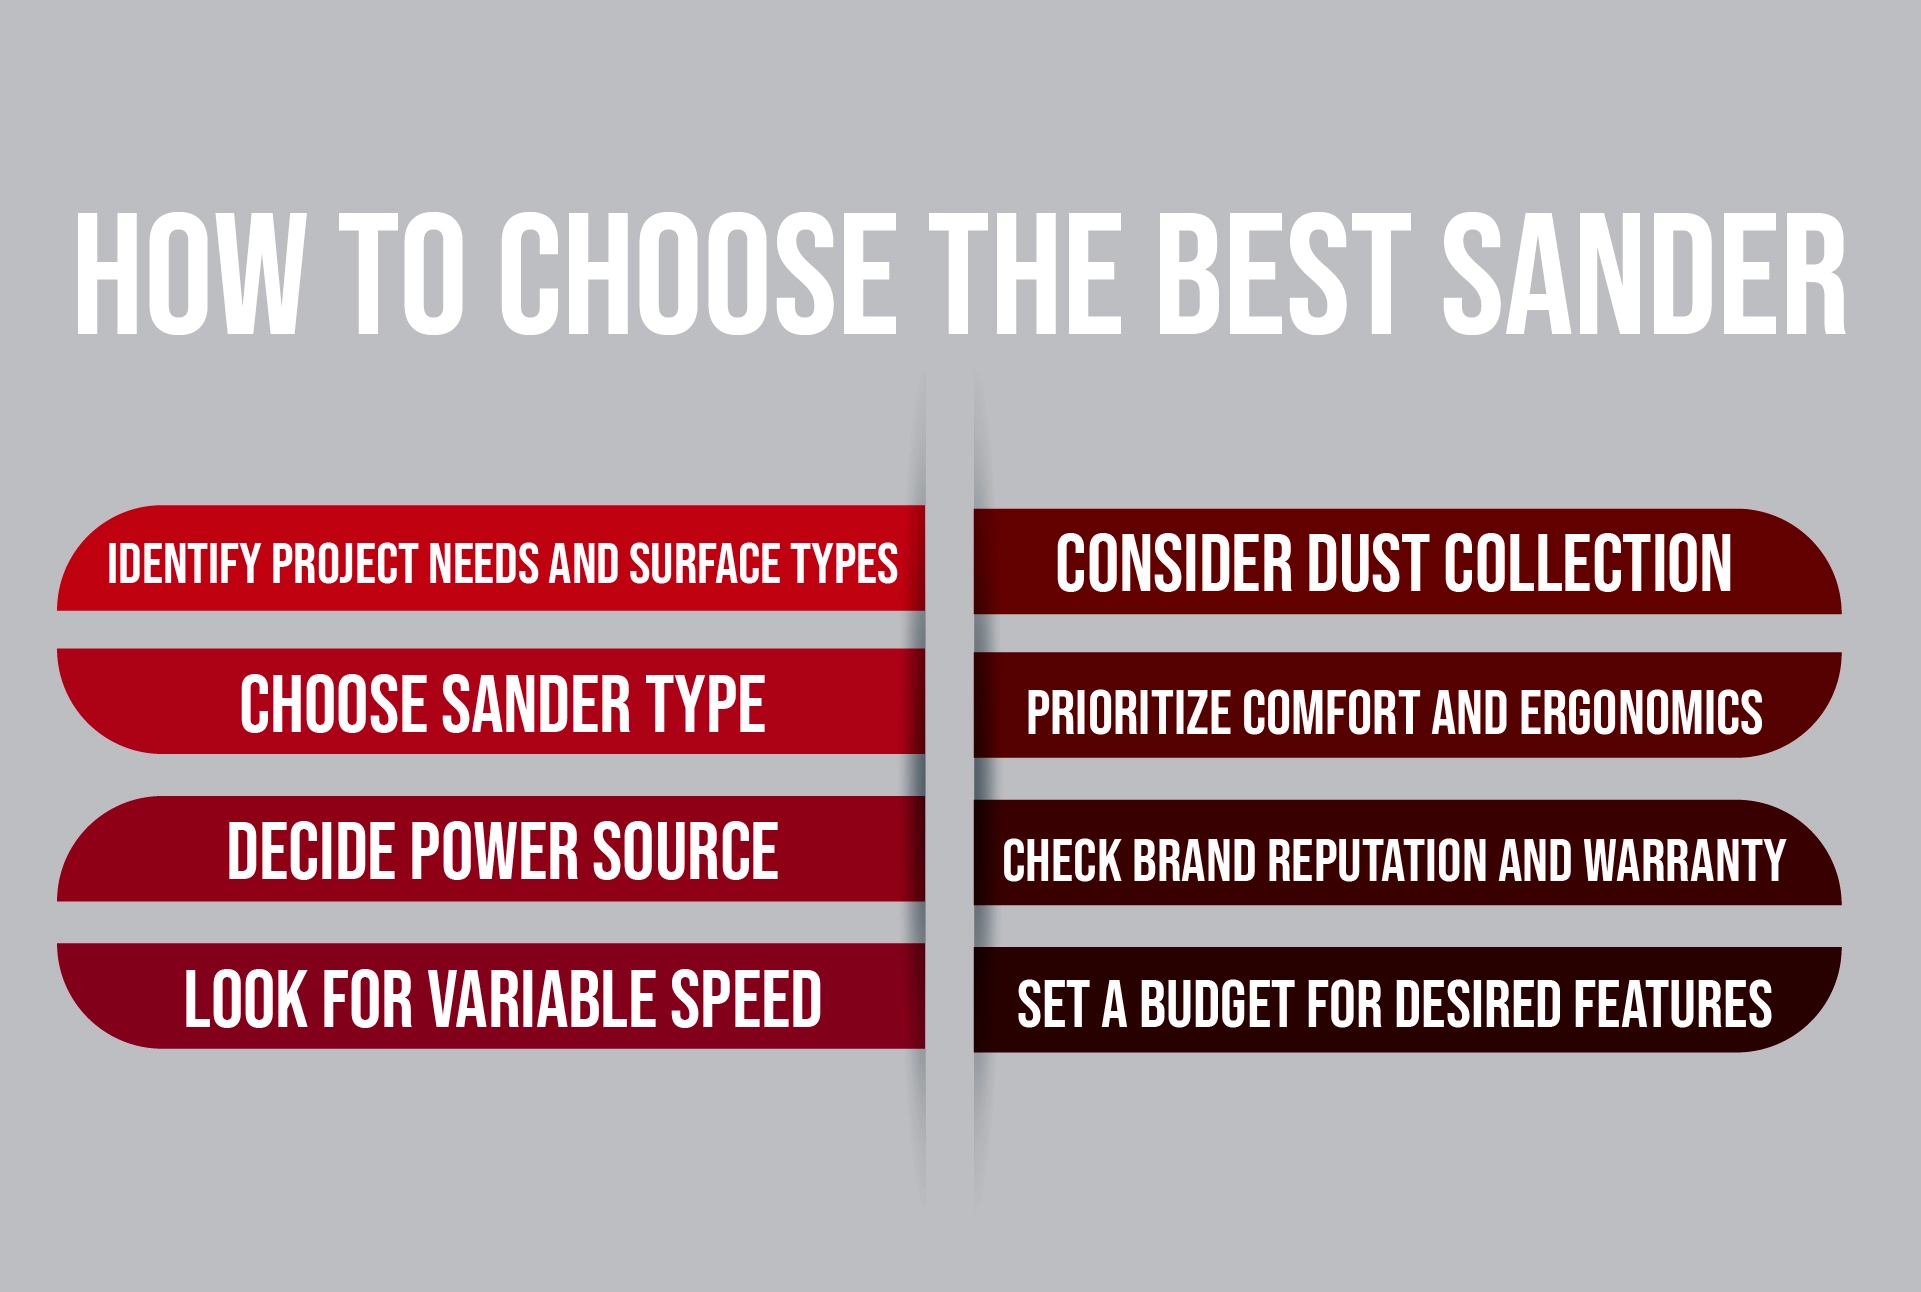 A guide on selecting the ideal sander.